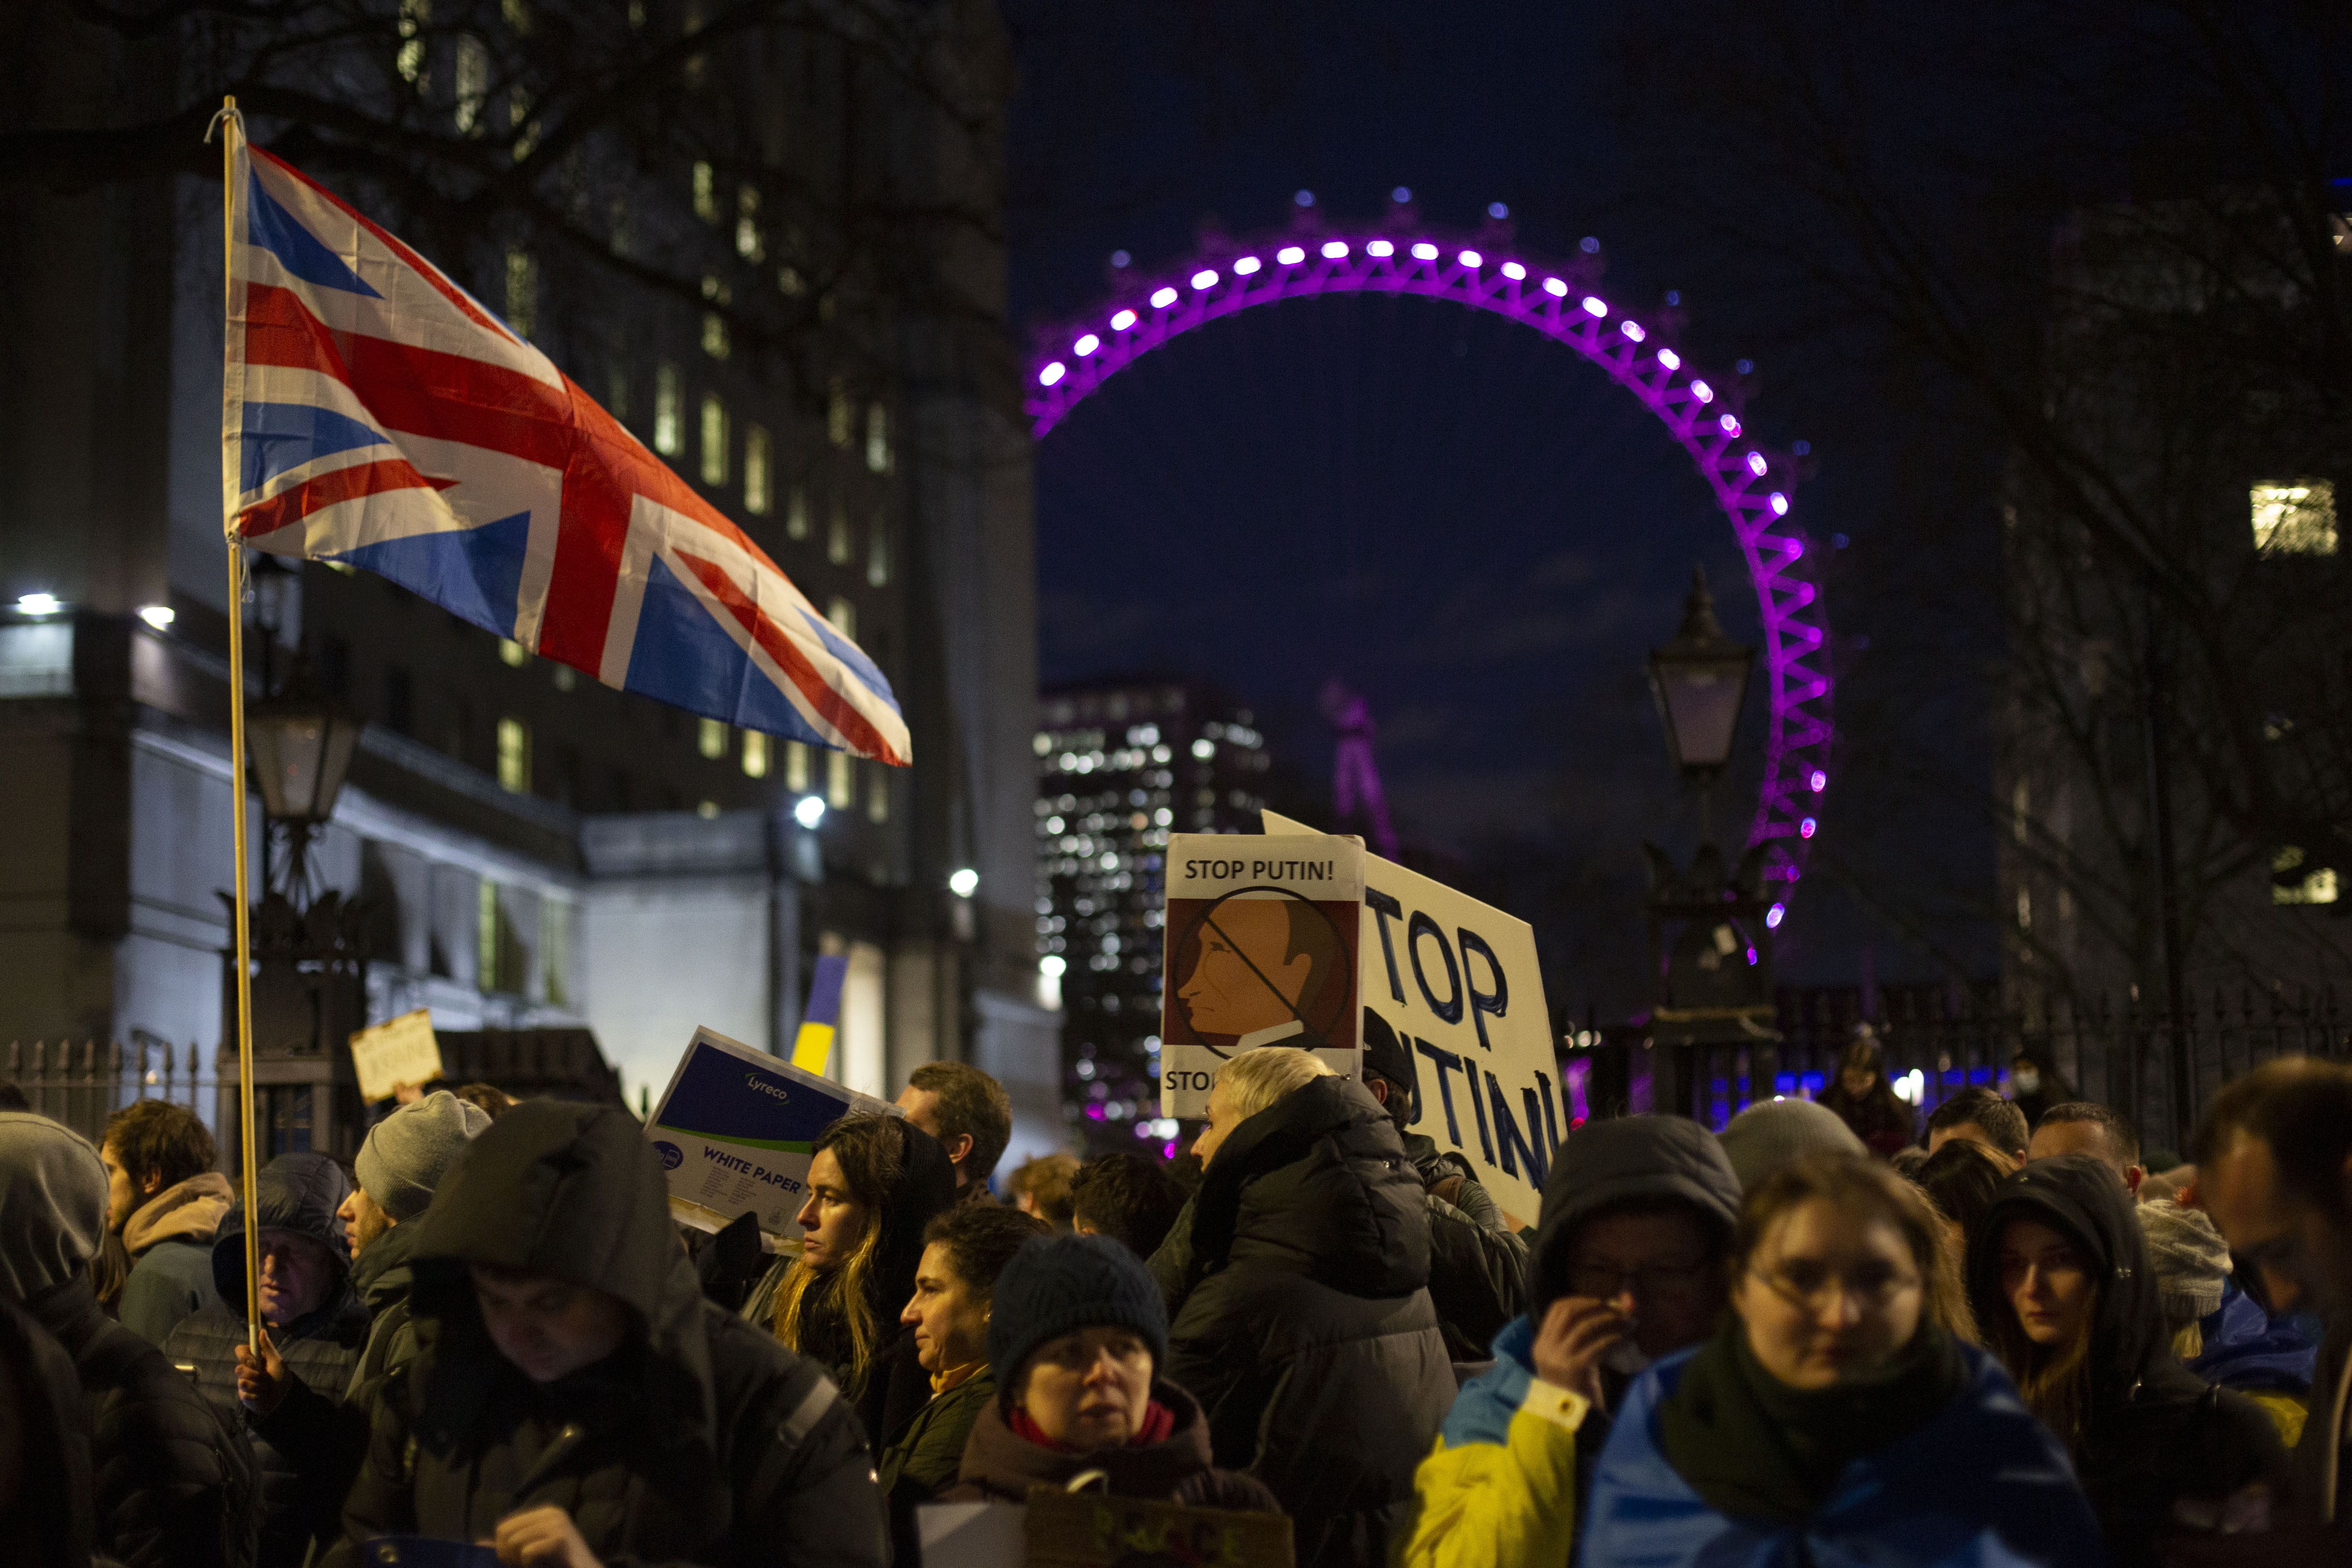 Anti-war demonstrators and Ukrainians living in UK, gather around 10 Downing Street to protest against Russia's military operation in Ukraine, on February 24, 2022 in London, United Kingdom.